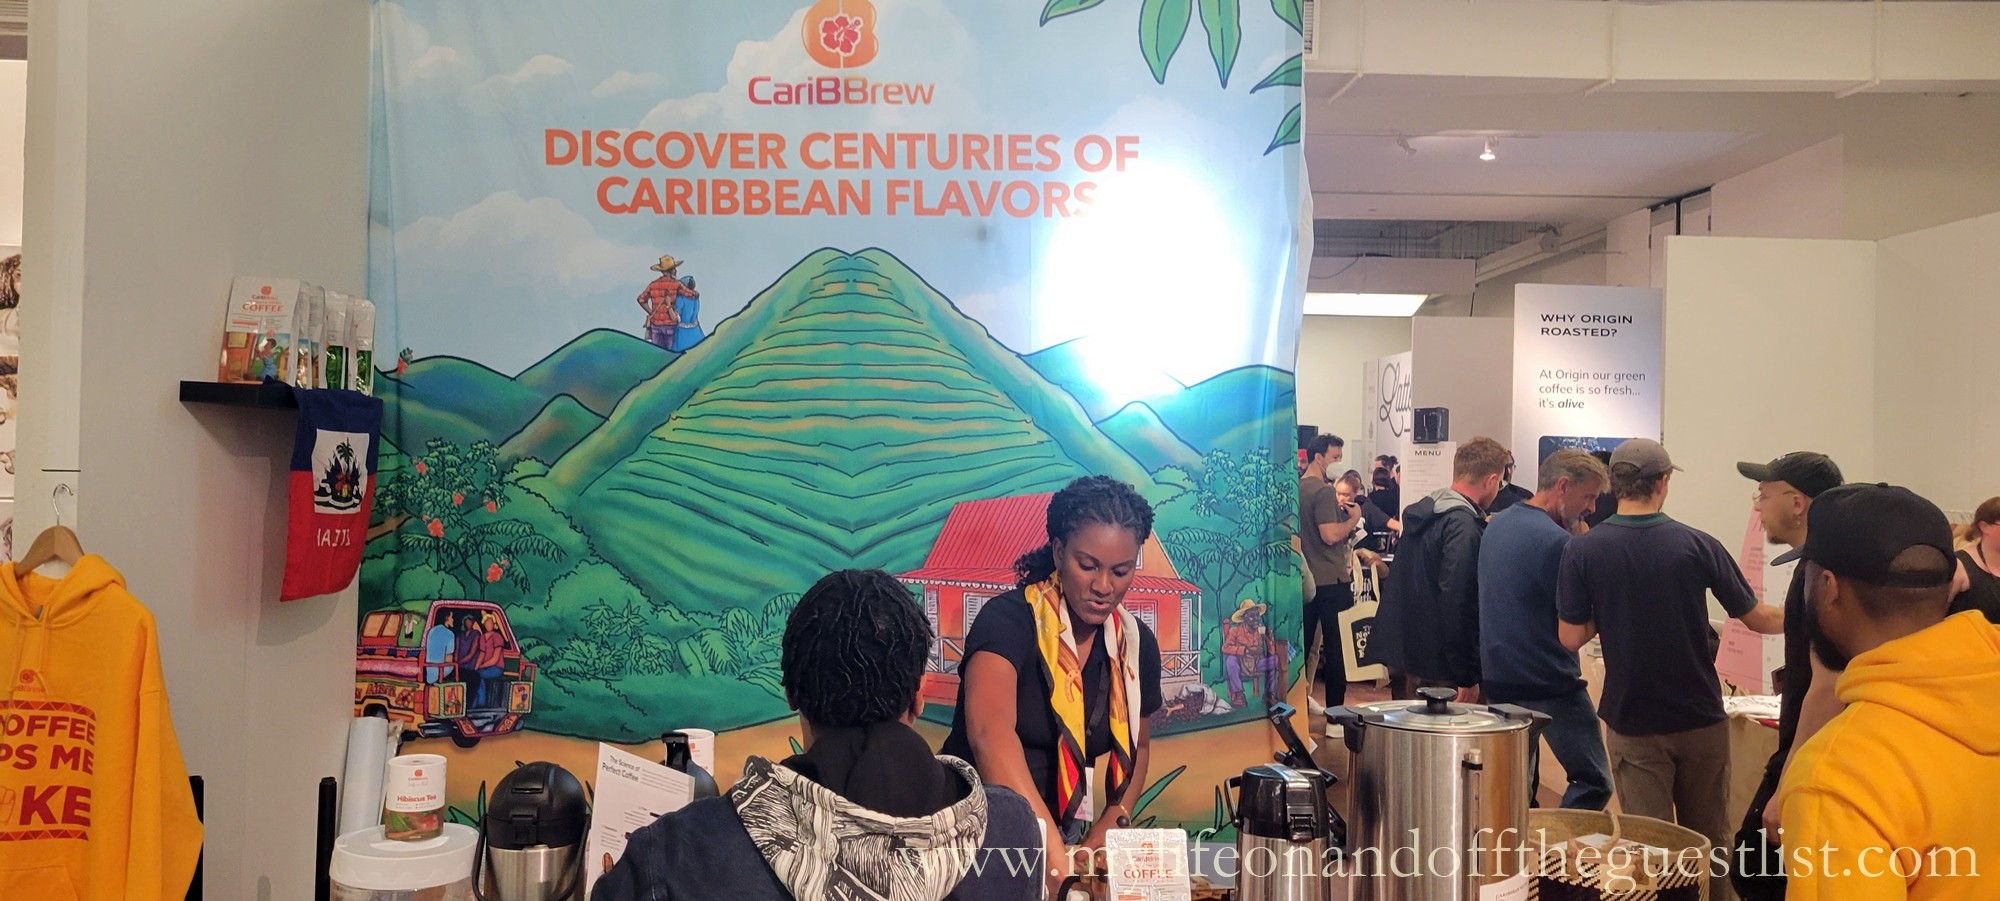 Caribbrew Coffee: Certified Delicious, Authentically Haitian 